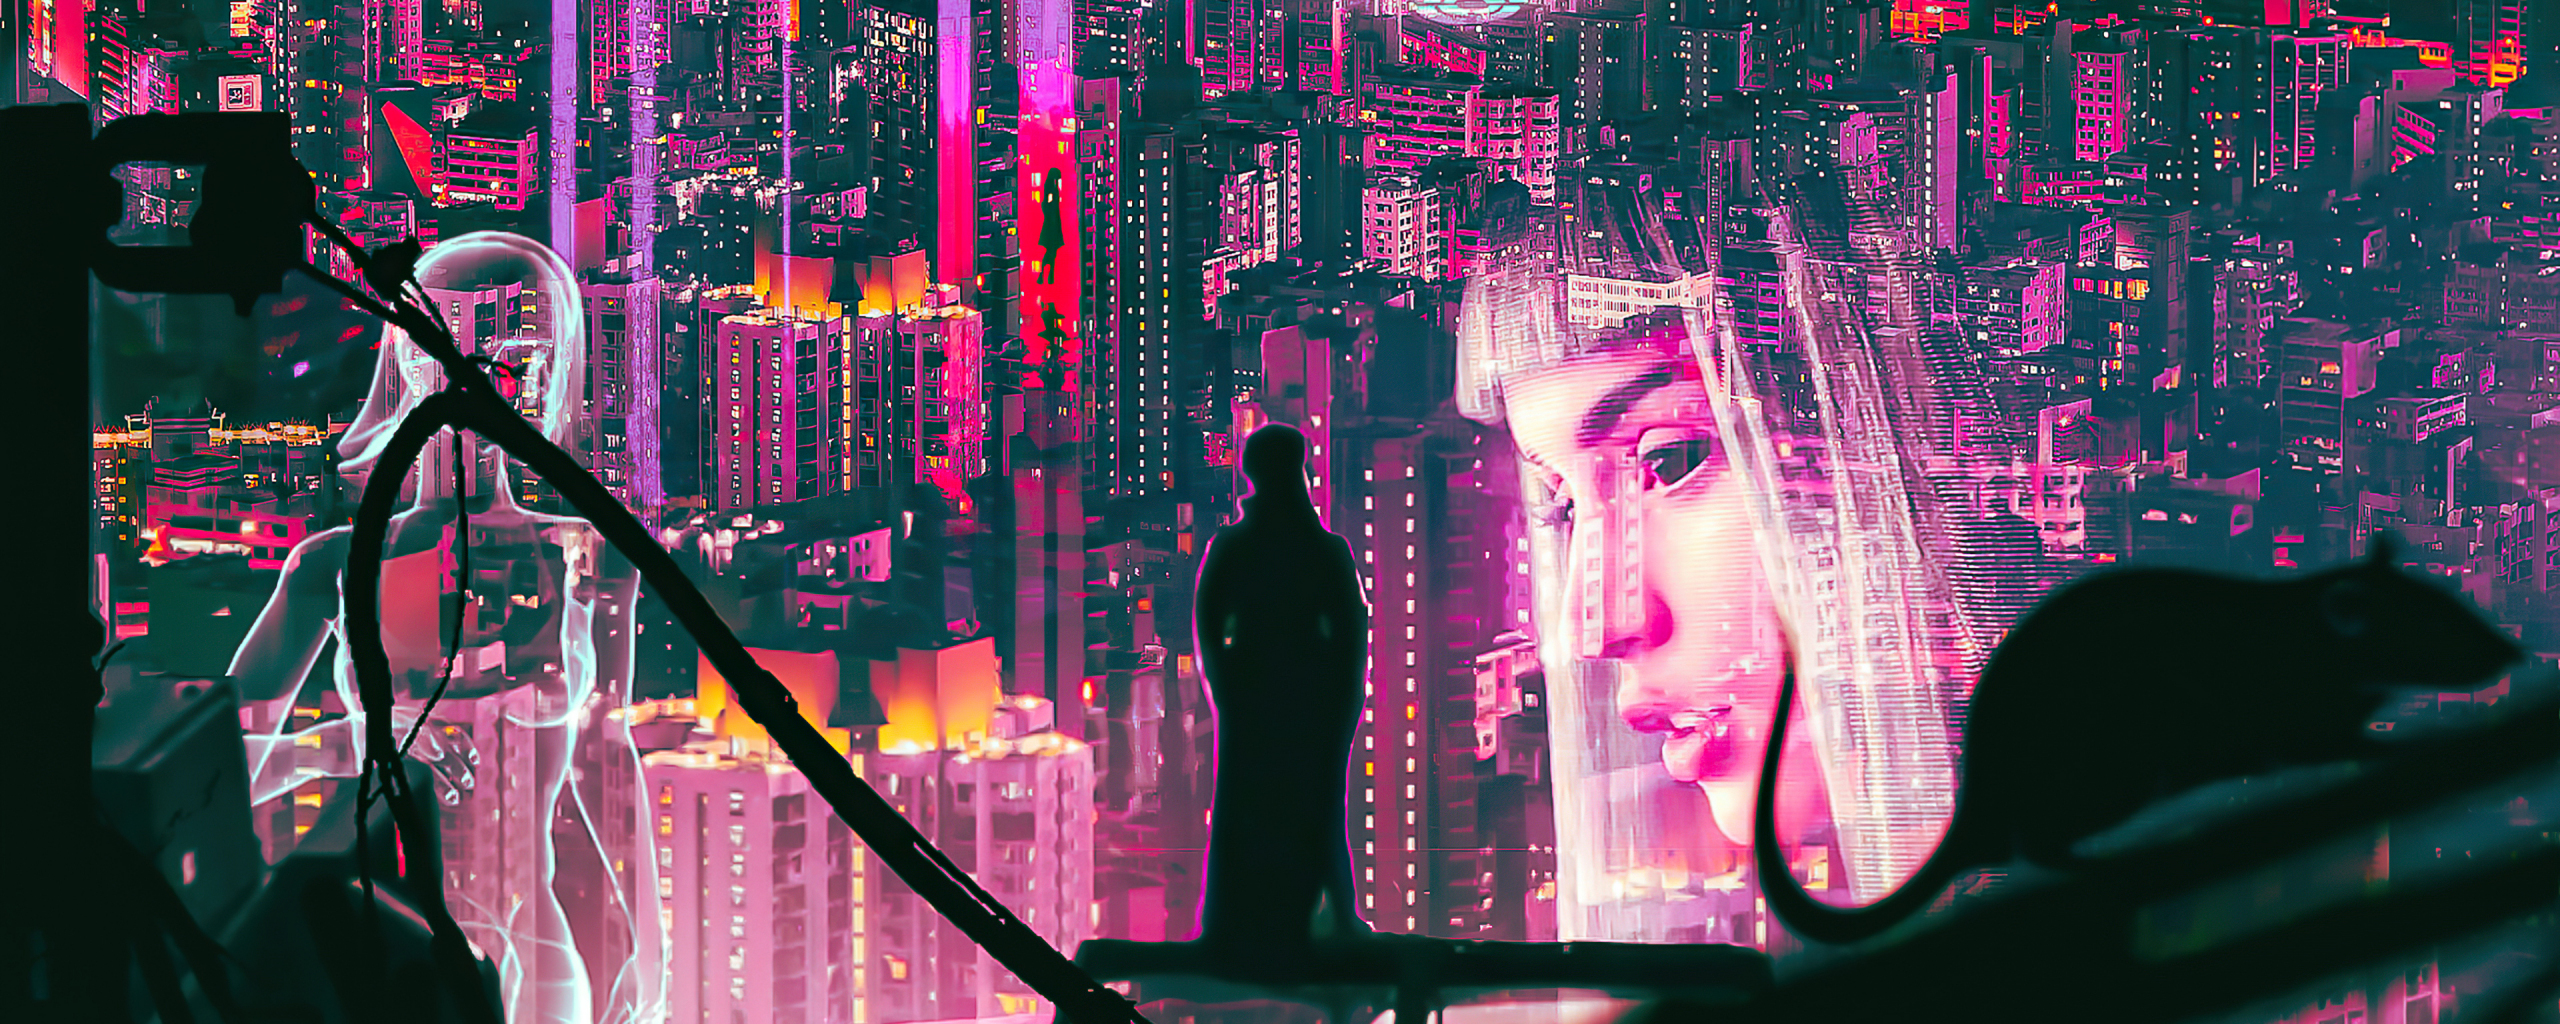 The Night Begin, Ghost in The Shell, art, 2560x1024 wallpaper